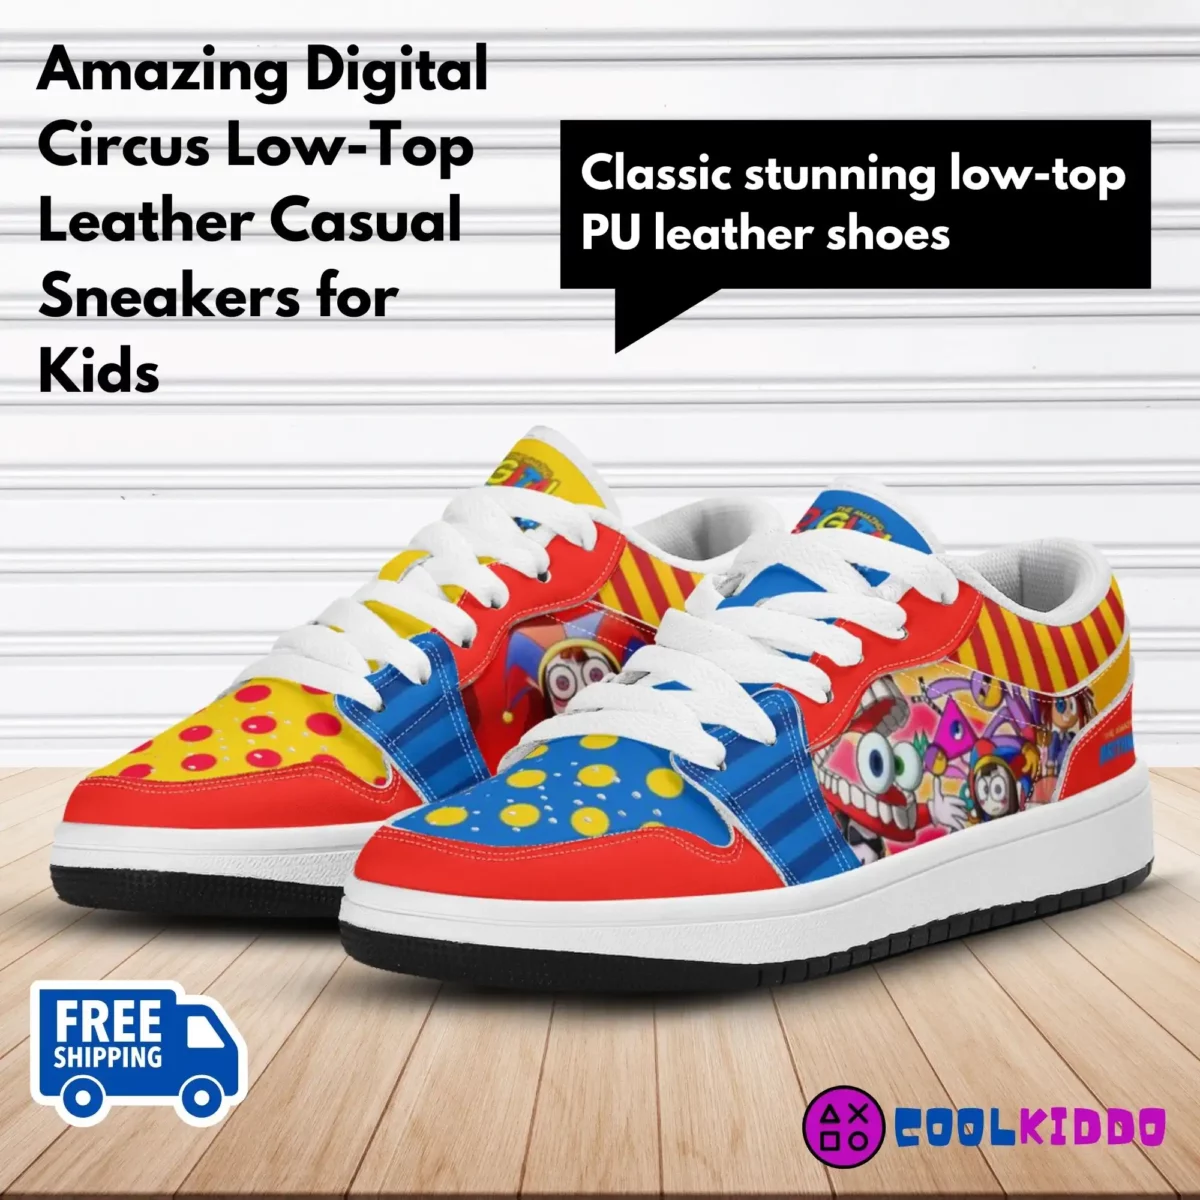 Personalized The Amazing Digital Circus Leather Low-Top Sneakers for Kids | Unisex Casual Shoes Cool Kiddo 10